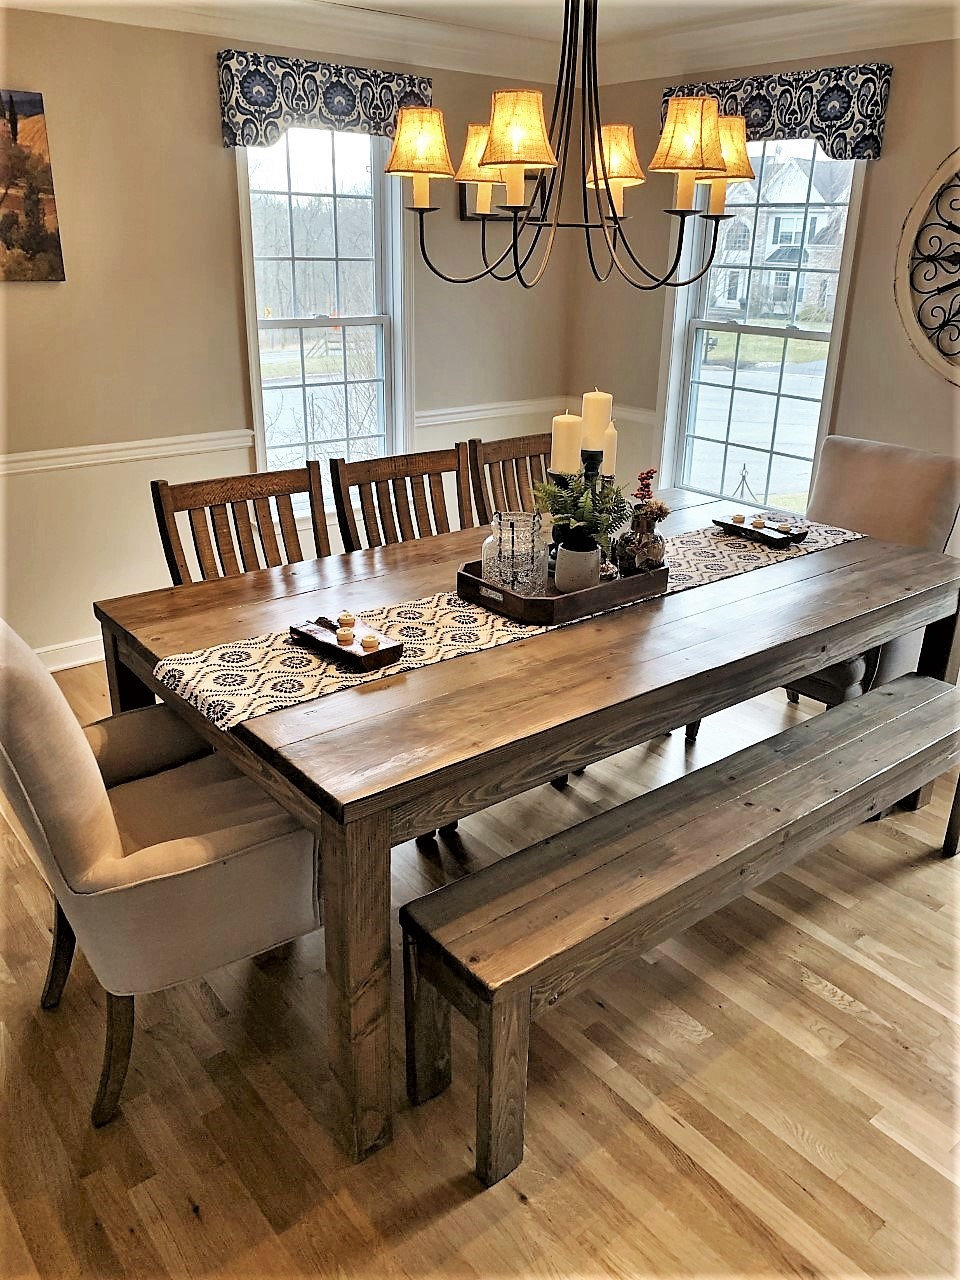 Rustic Farmhouse Dining Table, Rustic Wood Dining Room Table And Chairs